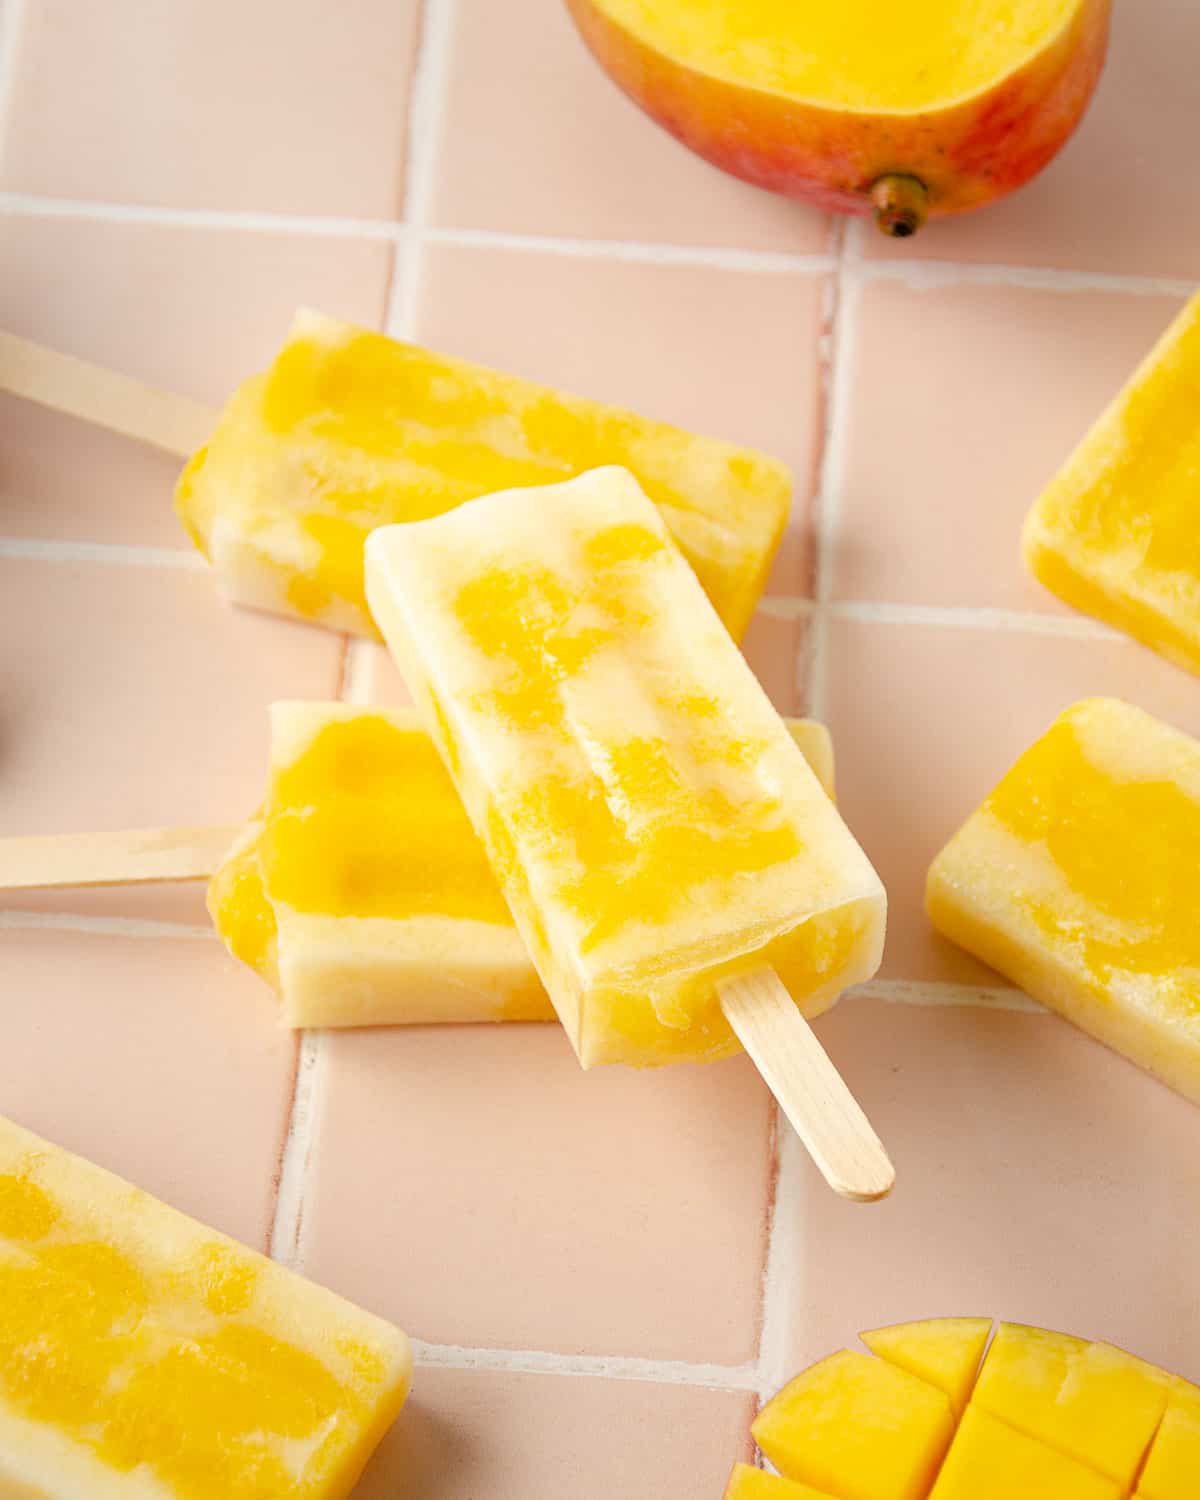 mango popsicles on top of one another on the pink countertop. two mango halves in the forefront of the photo